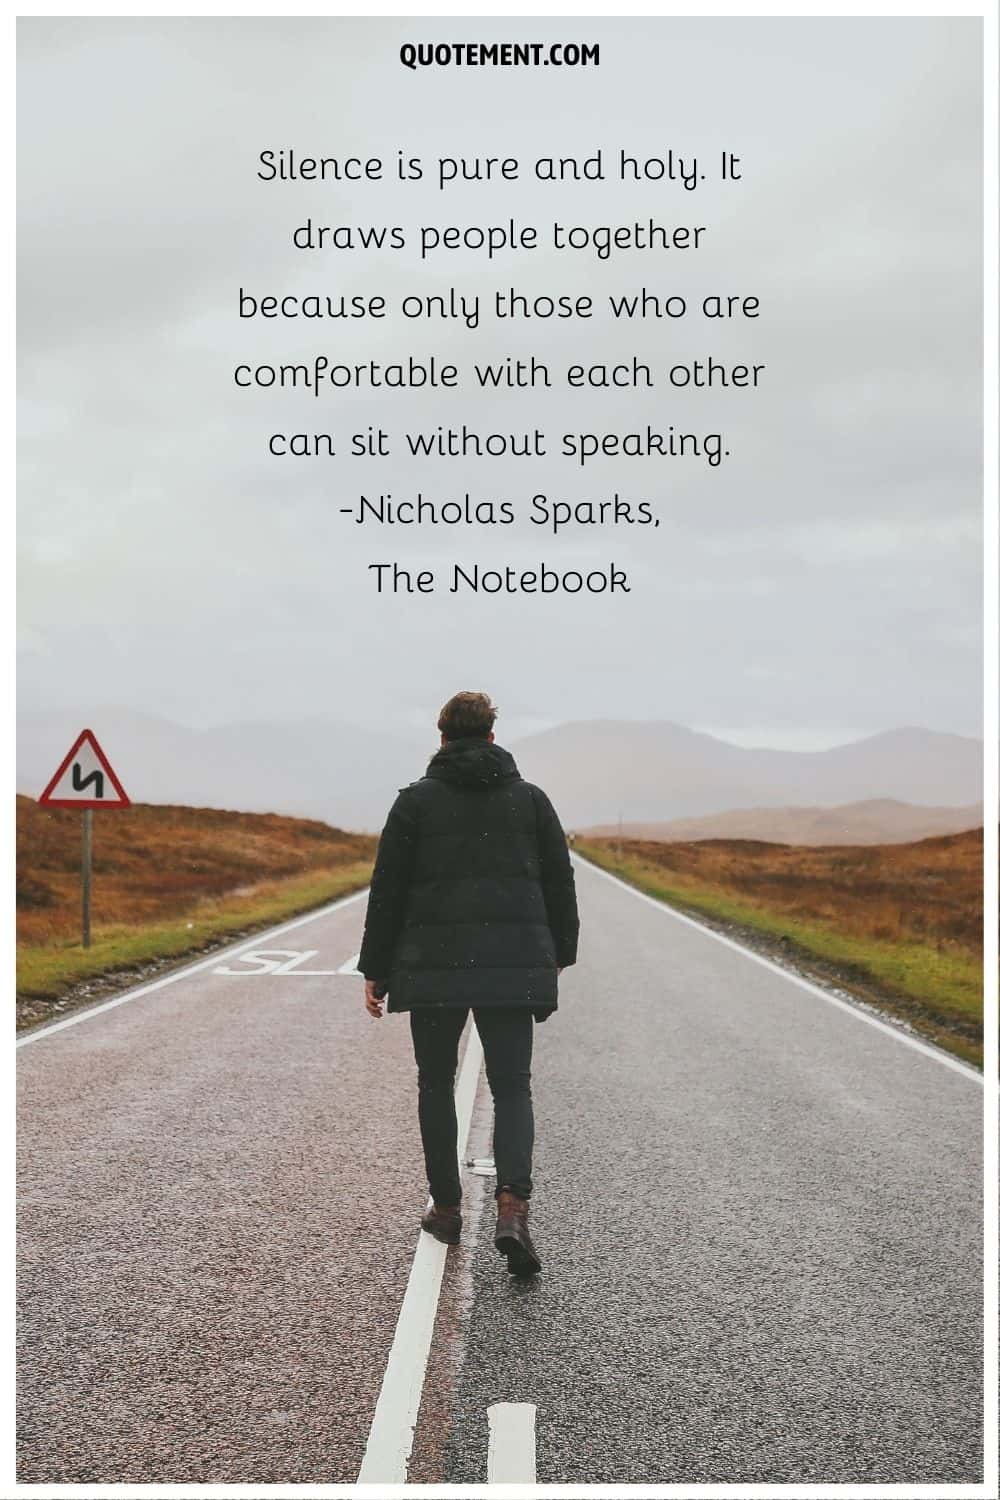 “Silence is pure and holy. It draws people together because only those who are comfortable with each other can sit without speaking.” ― Nicholas Sparks, The Notebook